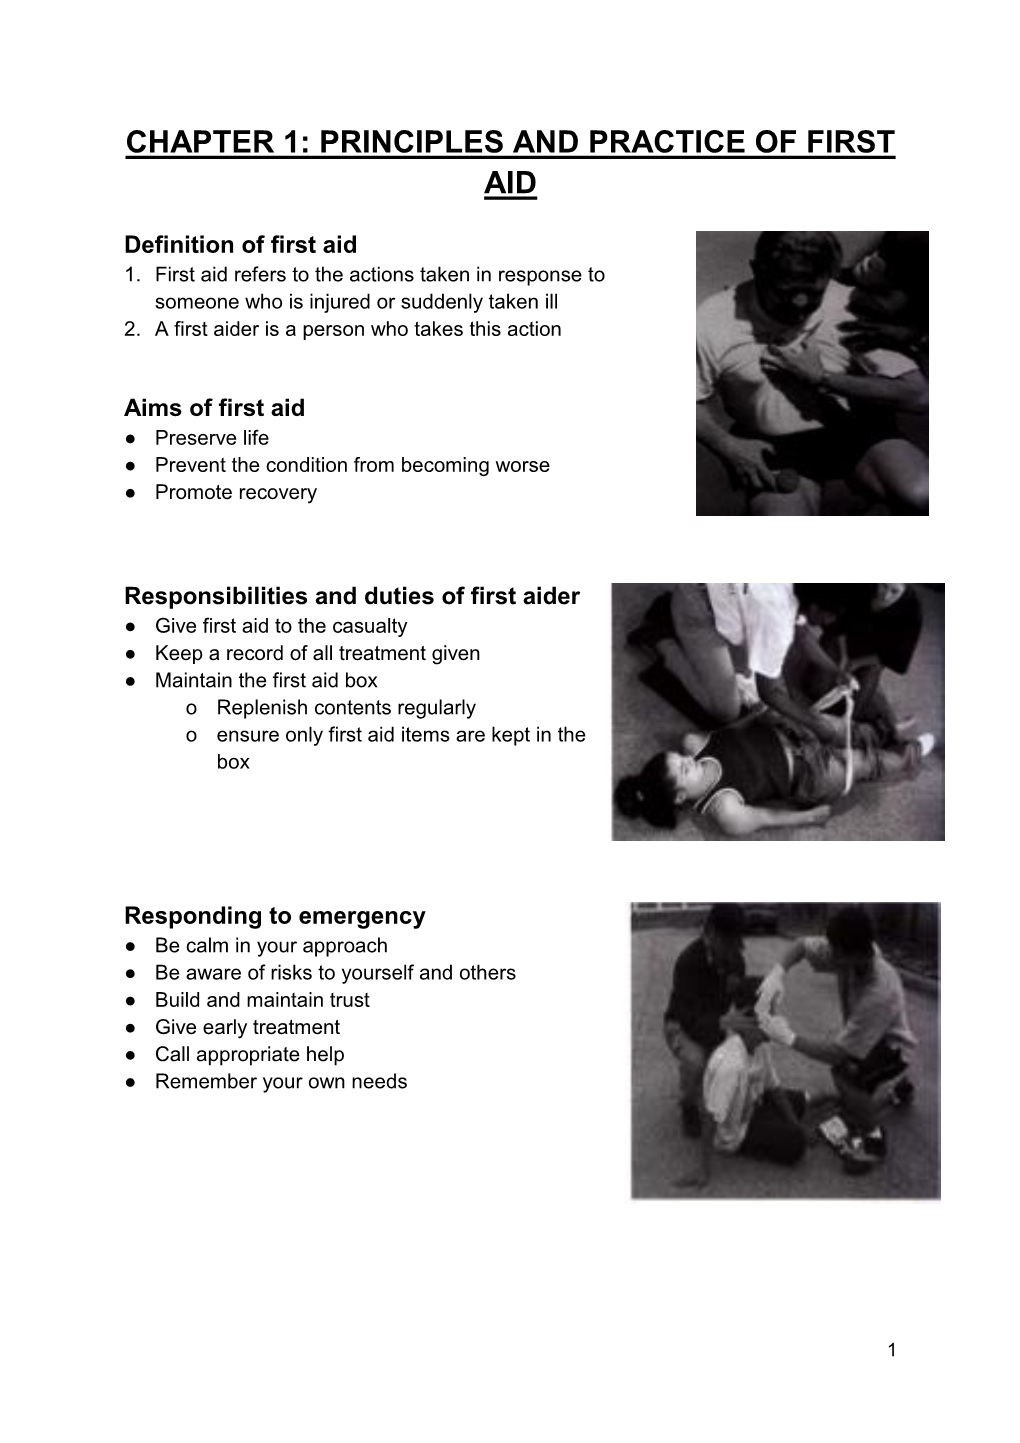 Principles and Practice of First Aid